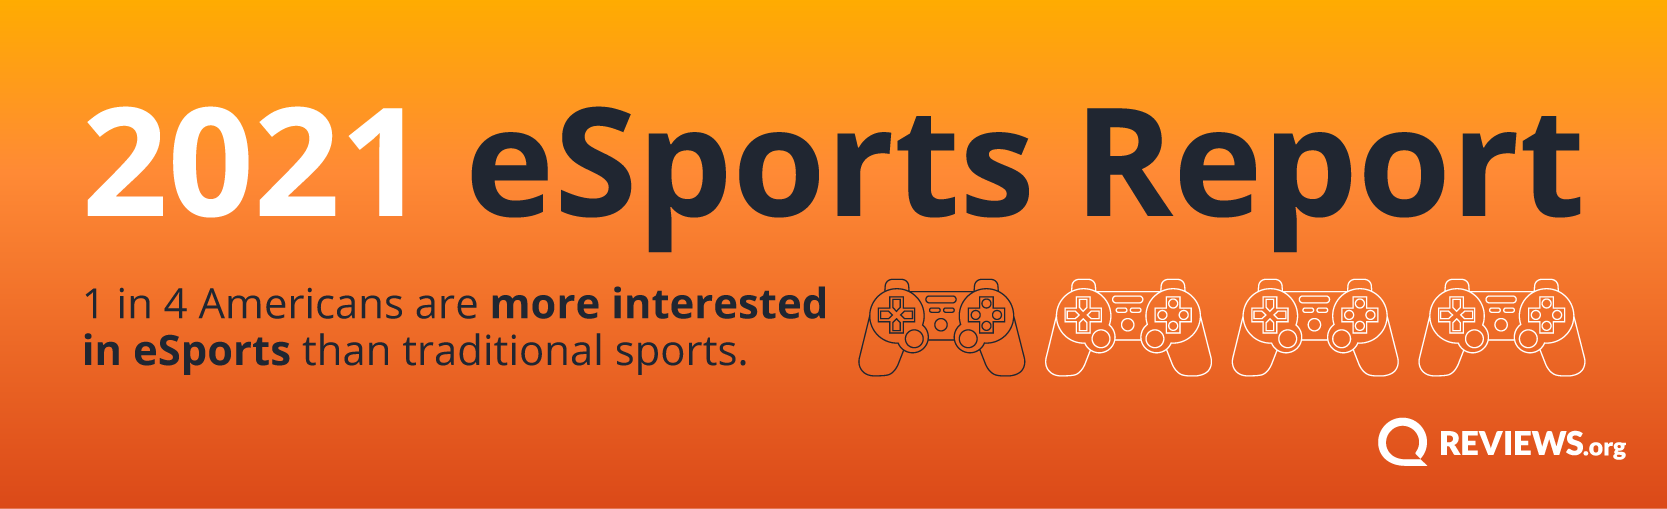 Geek insider, geekinsider, geekinsider. Com,, reviews. Org releases 2021 esports report, gaming